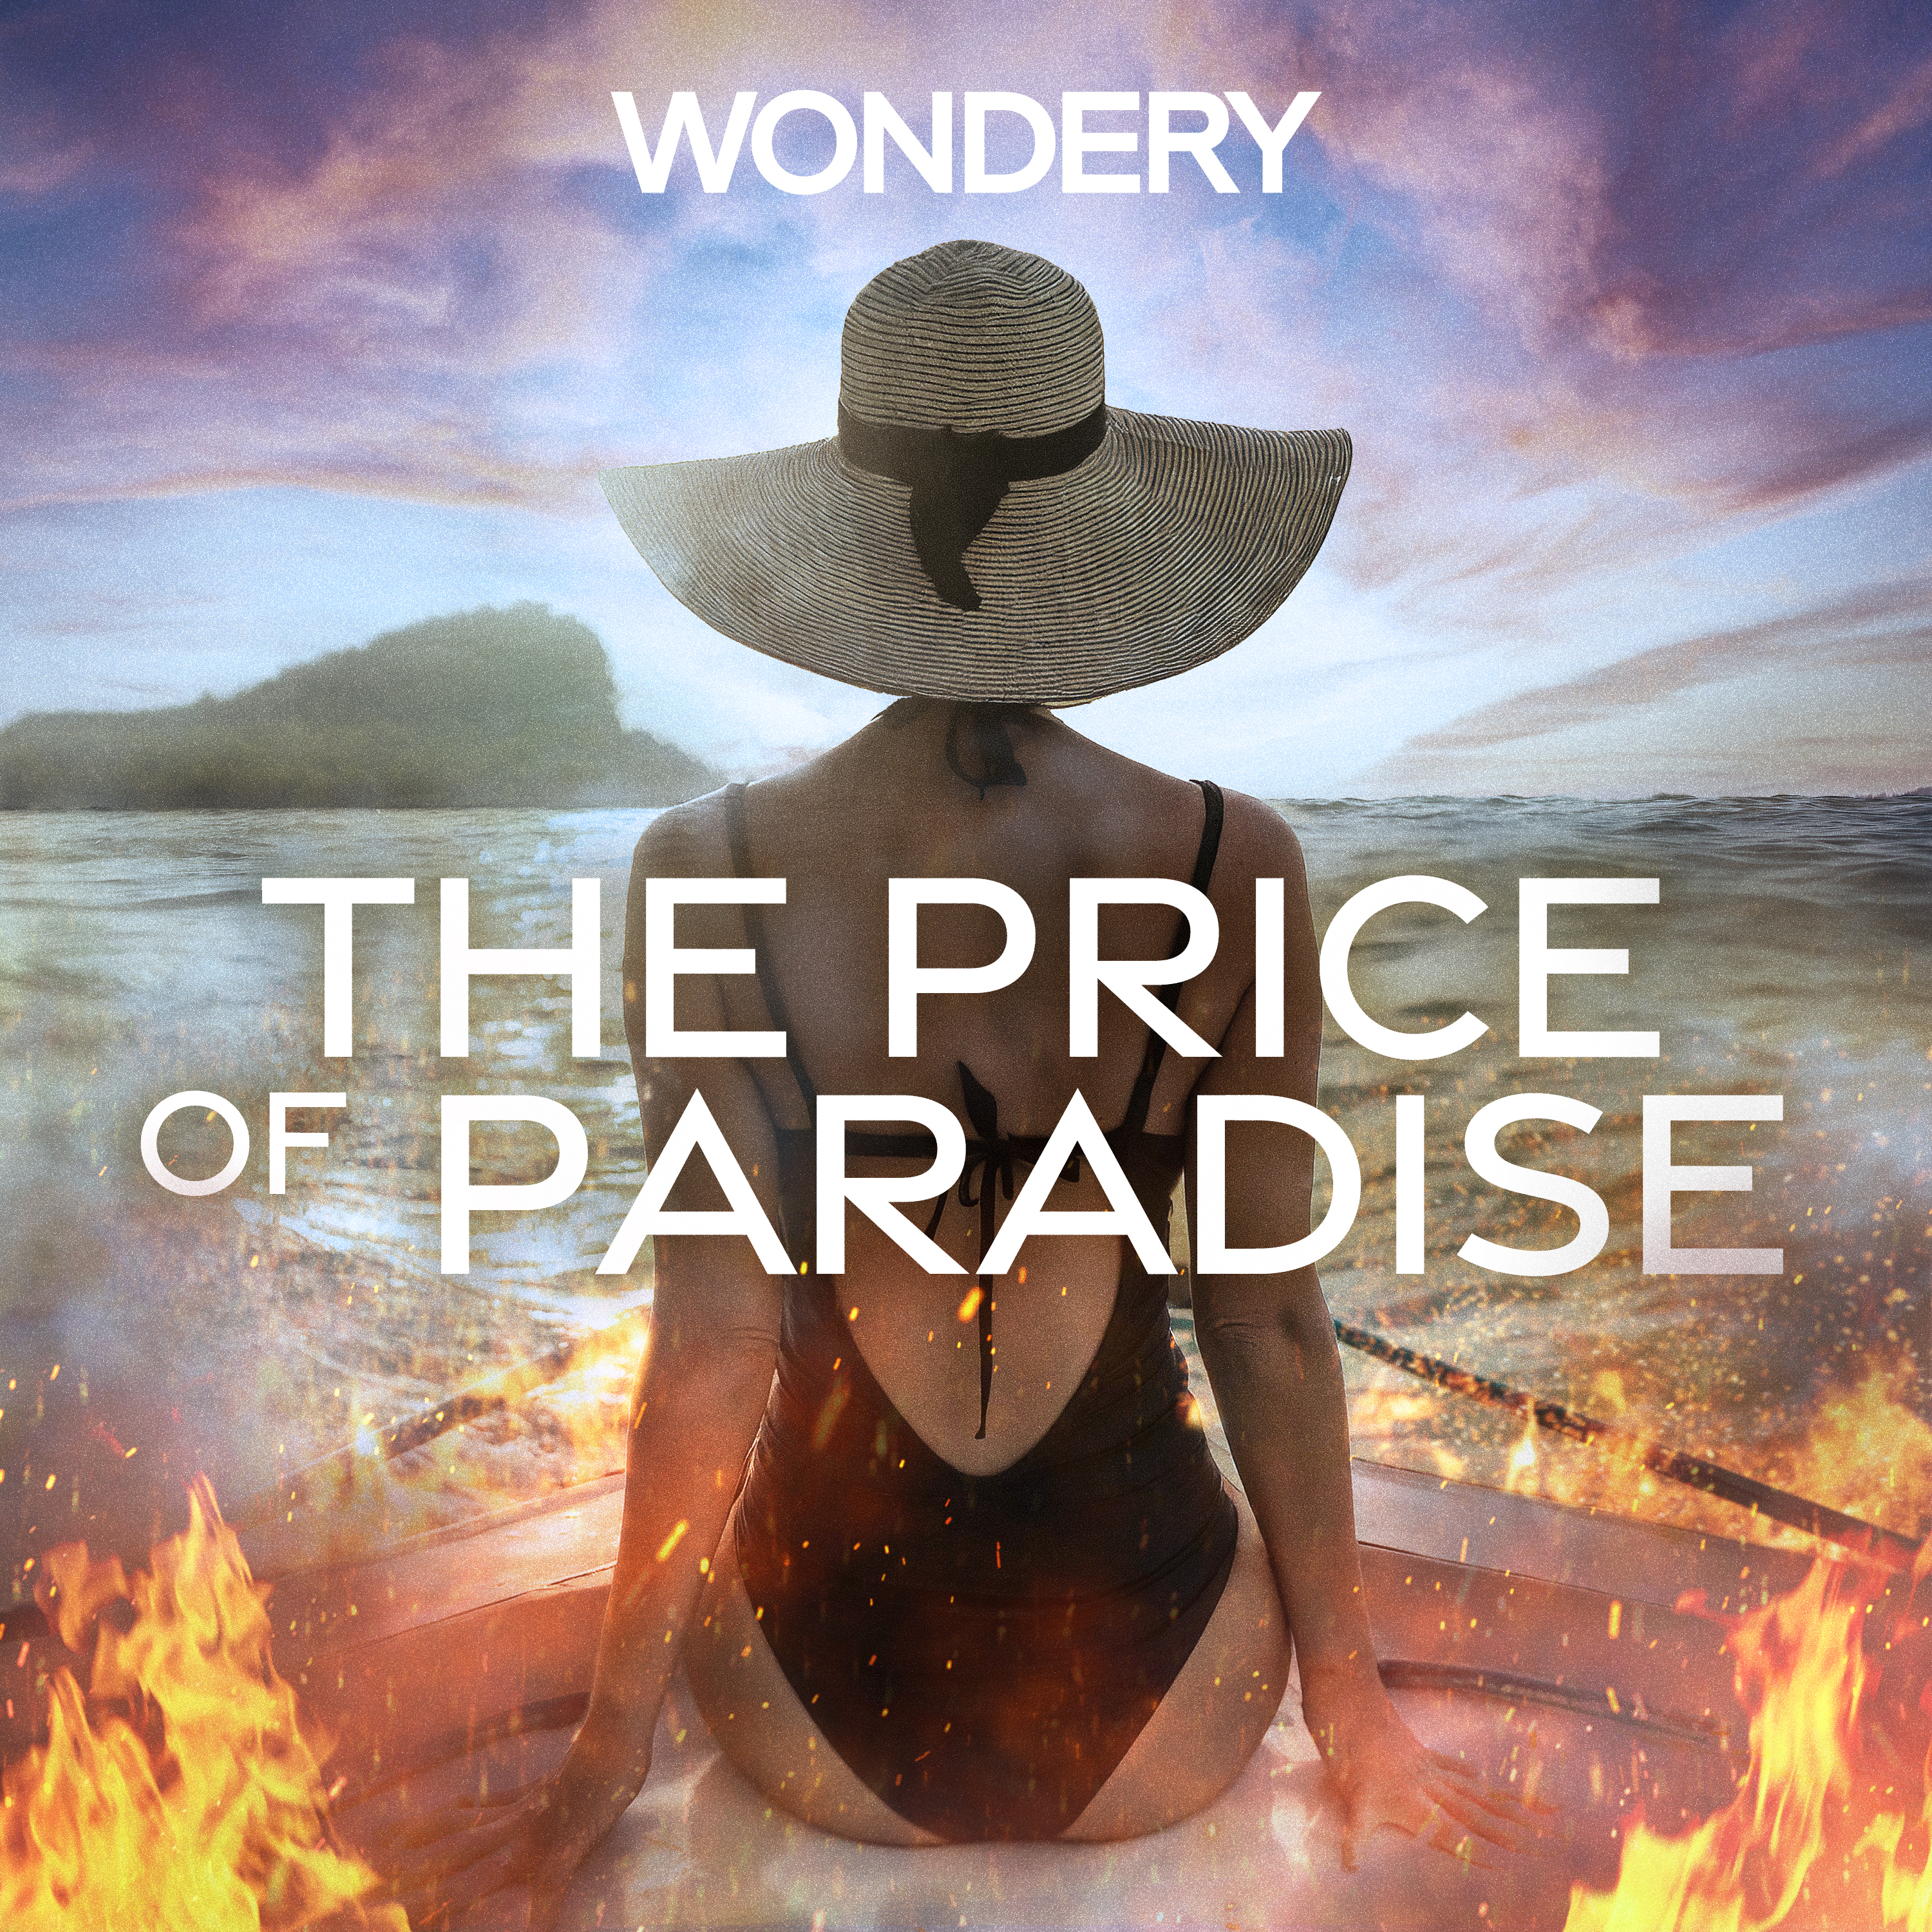 Introducing: The Price of Paradise by Wondery